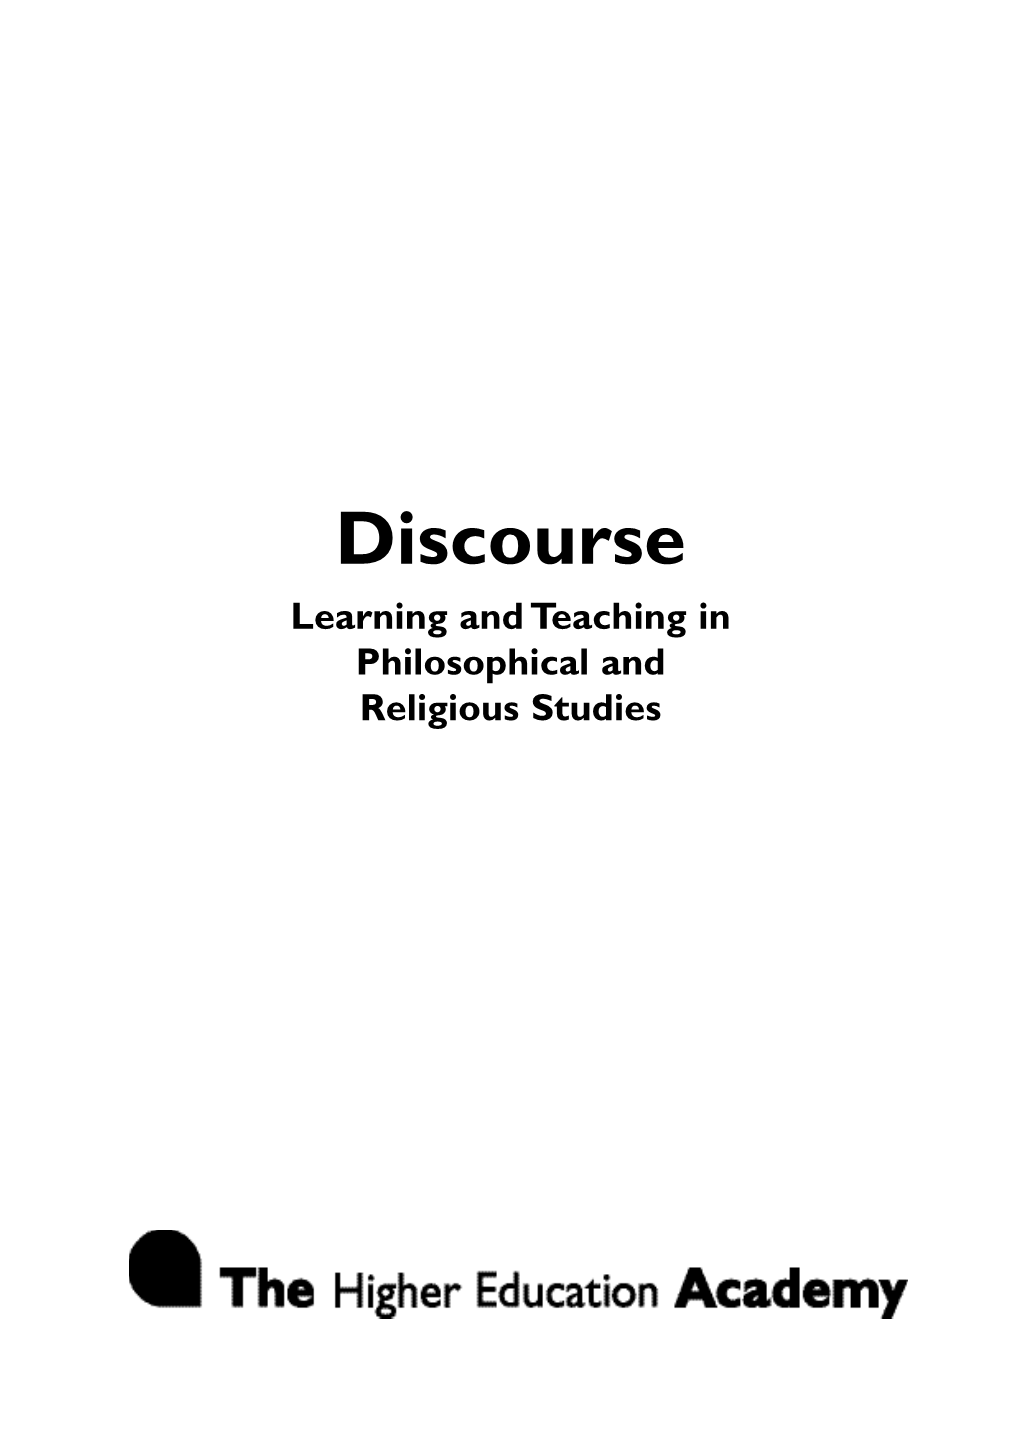 Discourse Learning and Teaching in Philosophical and Religious Studies Discourse: Learning and Teaching in Philosophical and Religious Studies